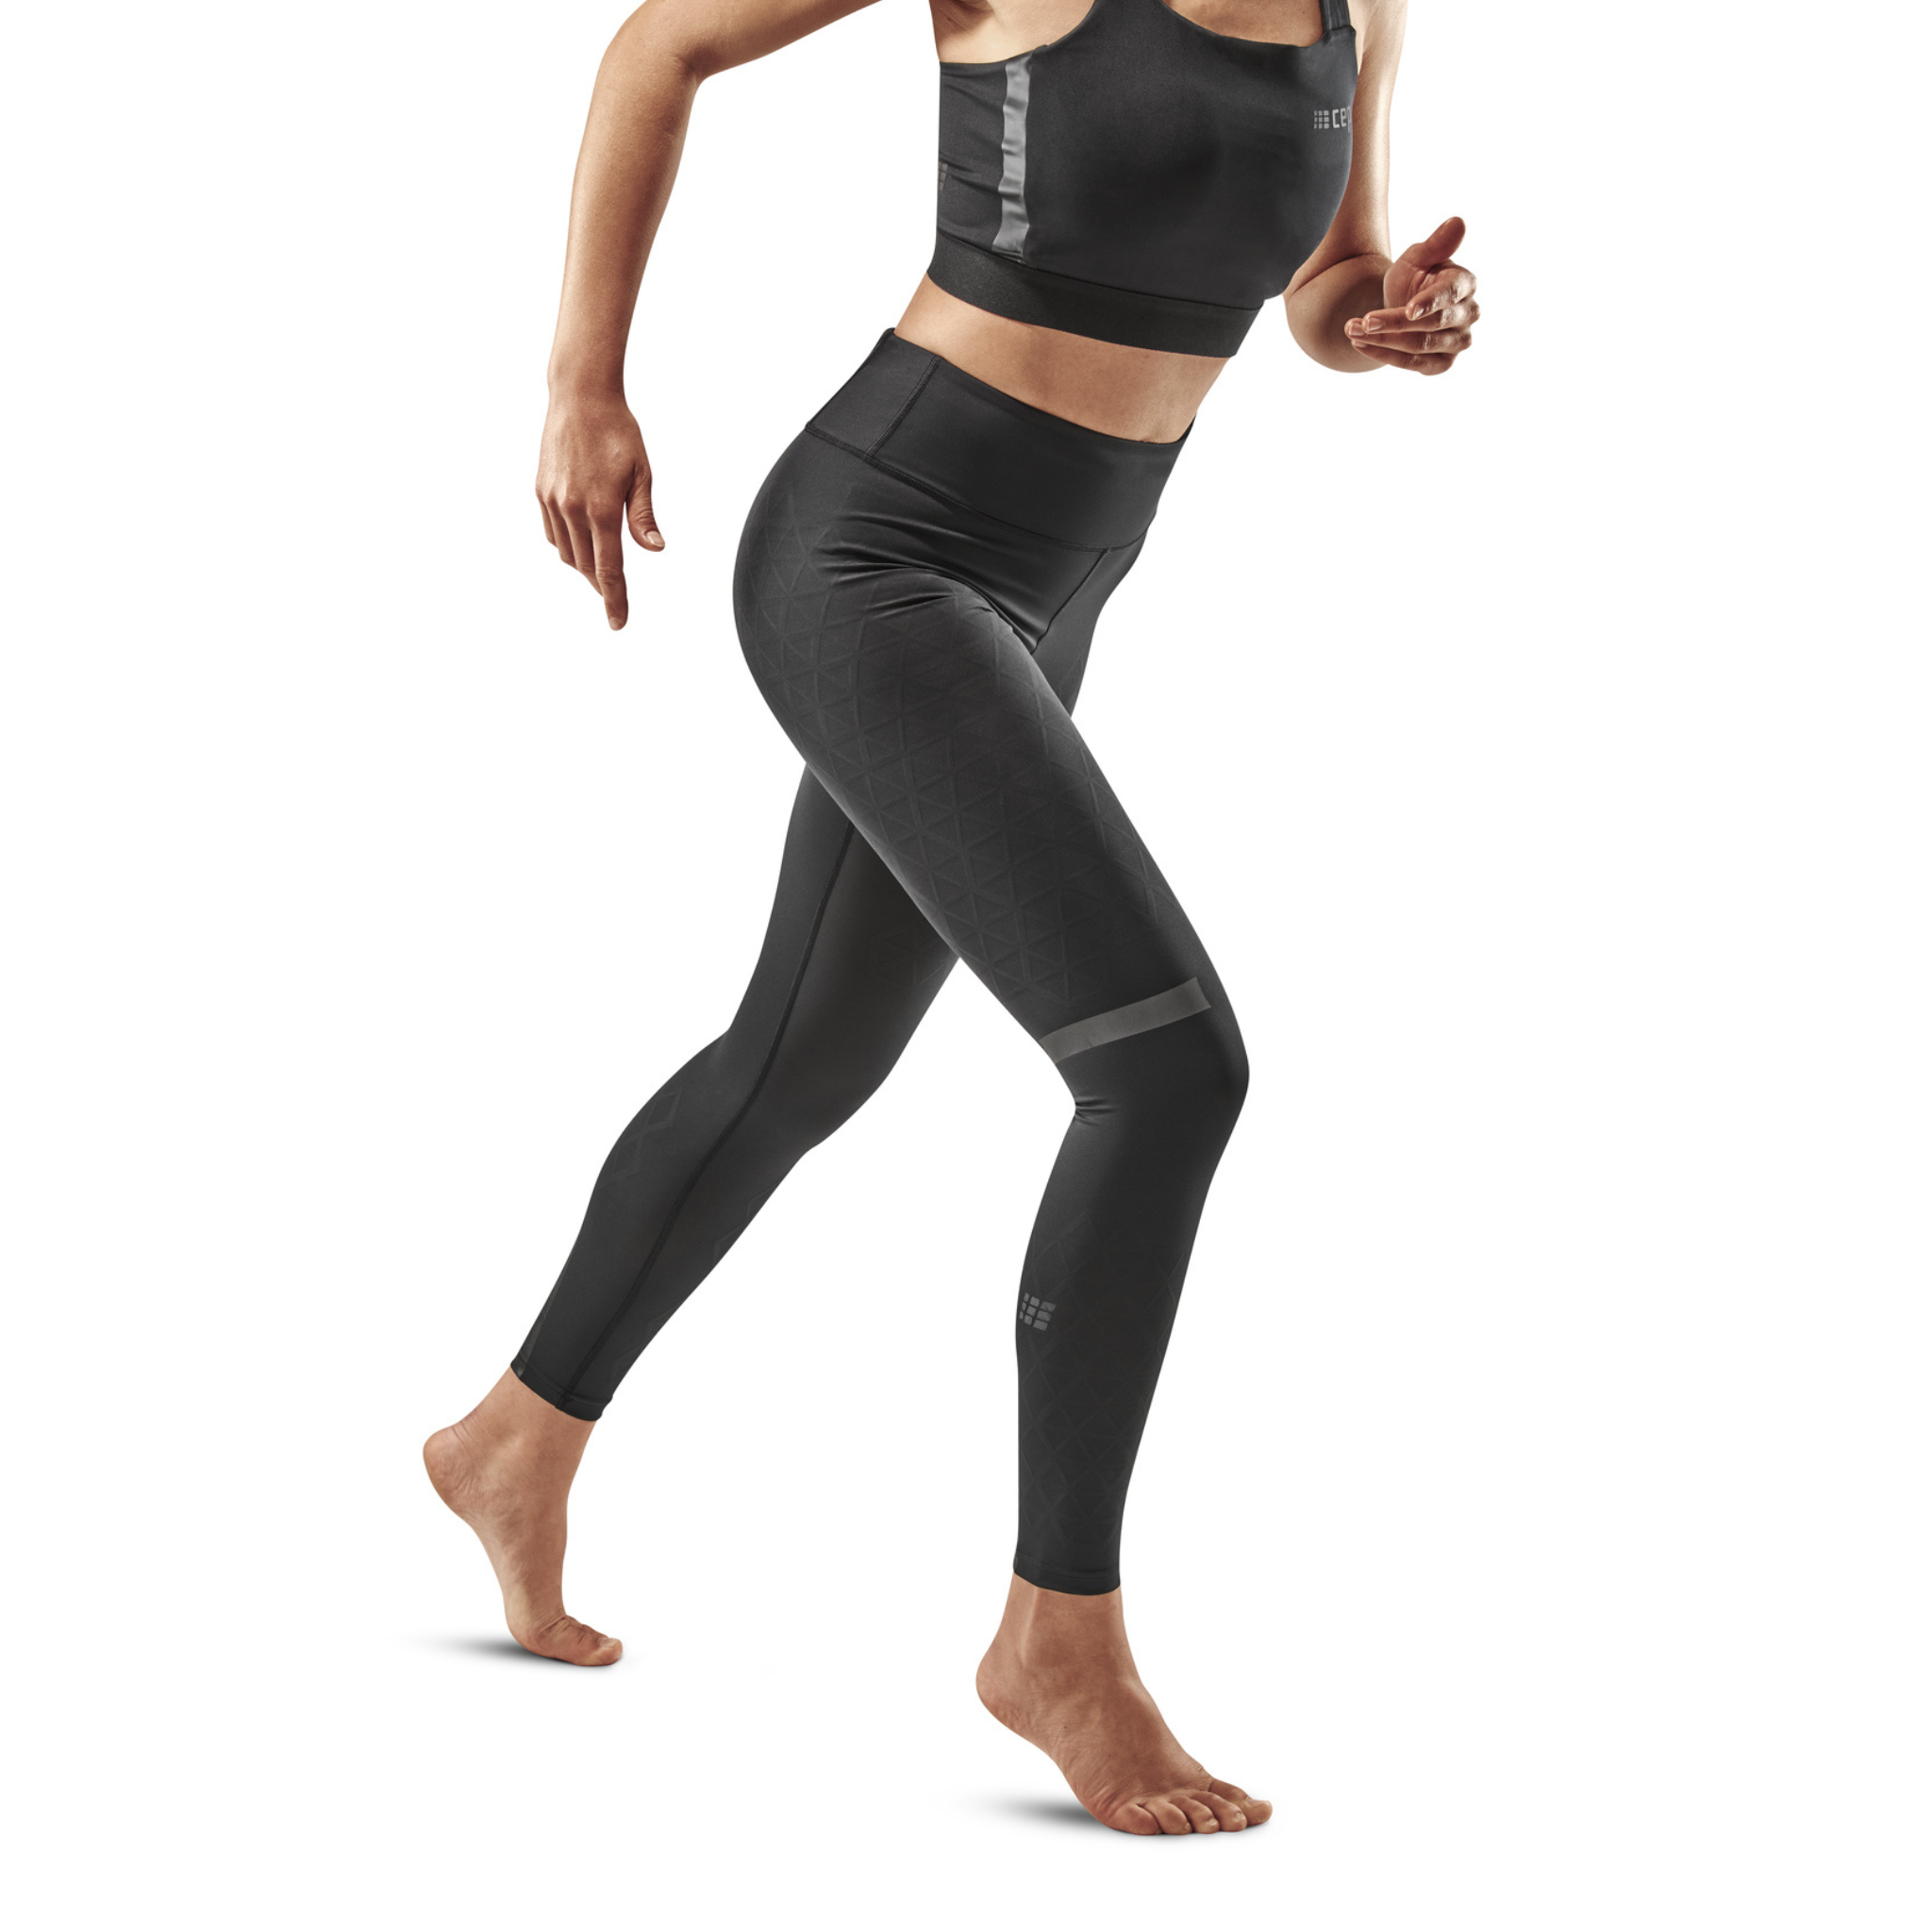 Legging CEP Compression The run - Clothing running - Running - Physical  maintenance